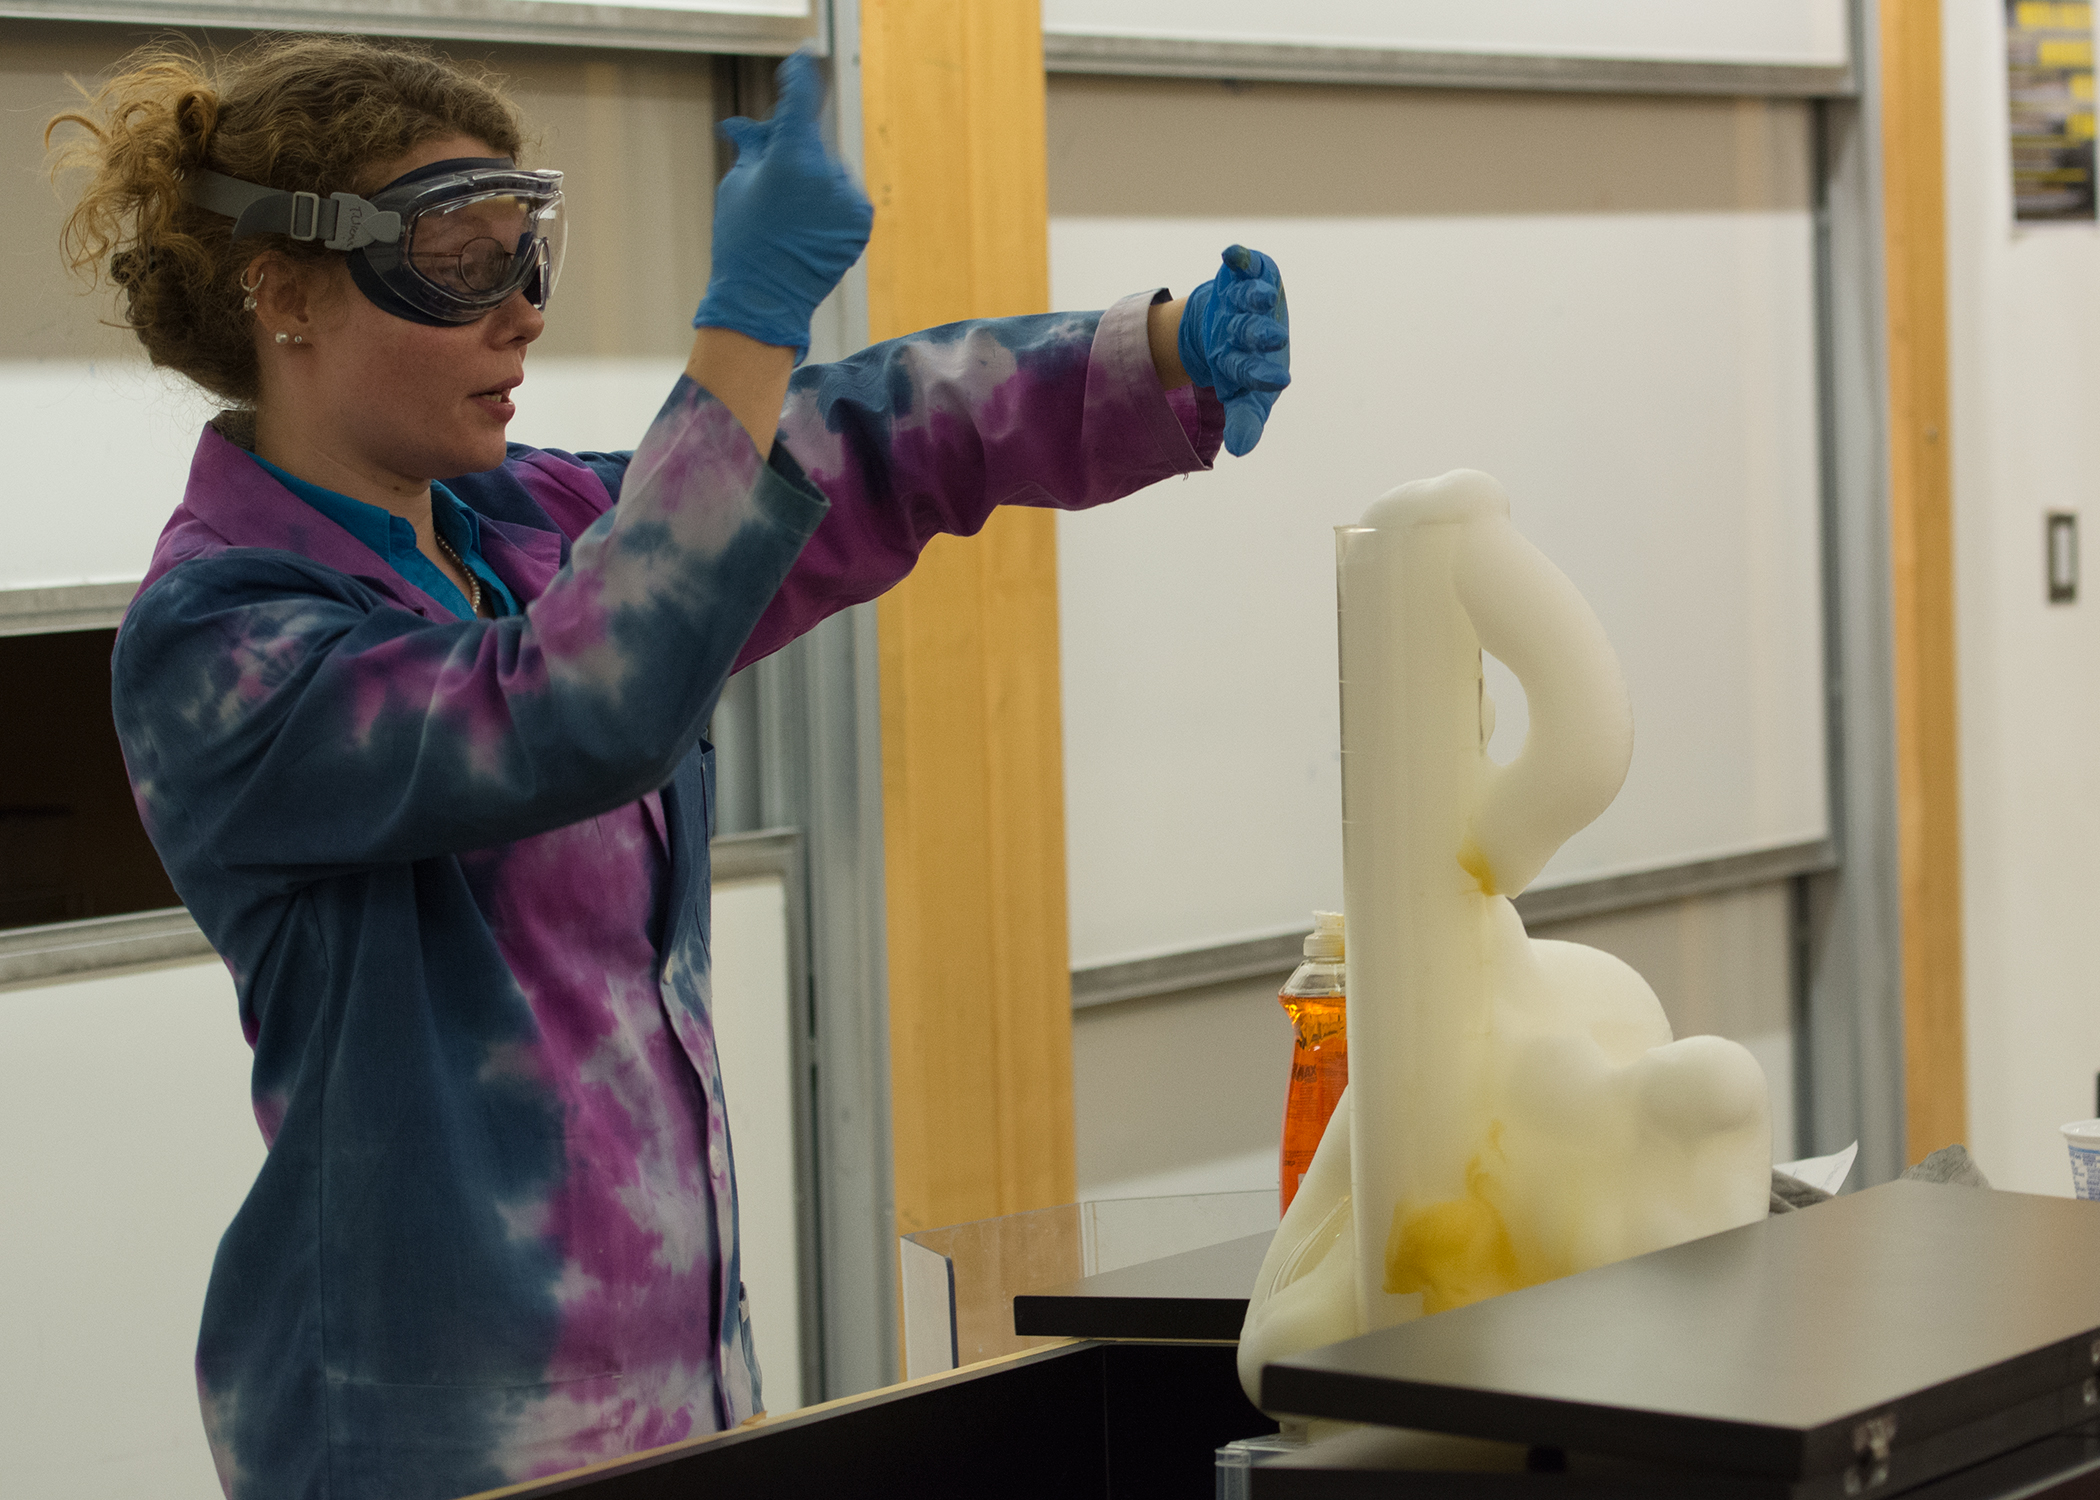 Professor Wrenn performs the "Elephant's Toothpaste" experiment durng the Chemistry Demonstration Show.